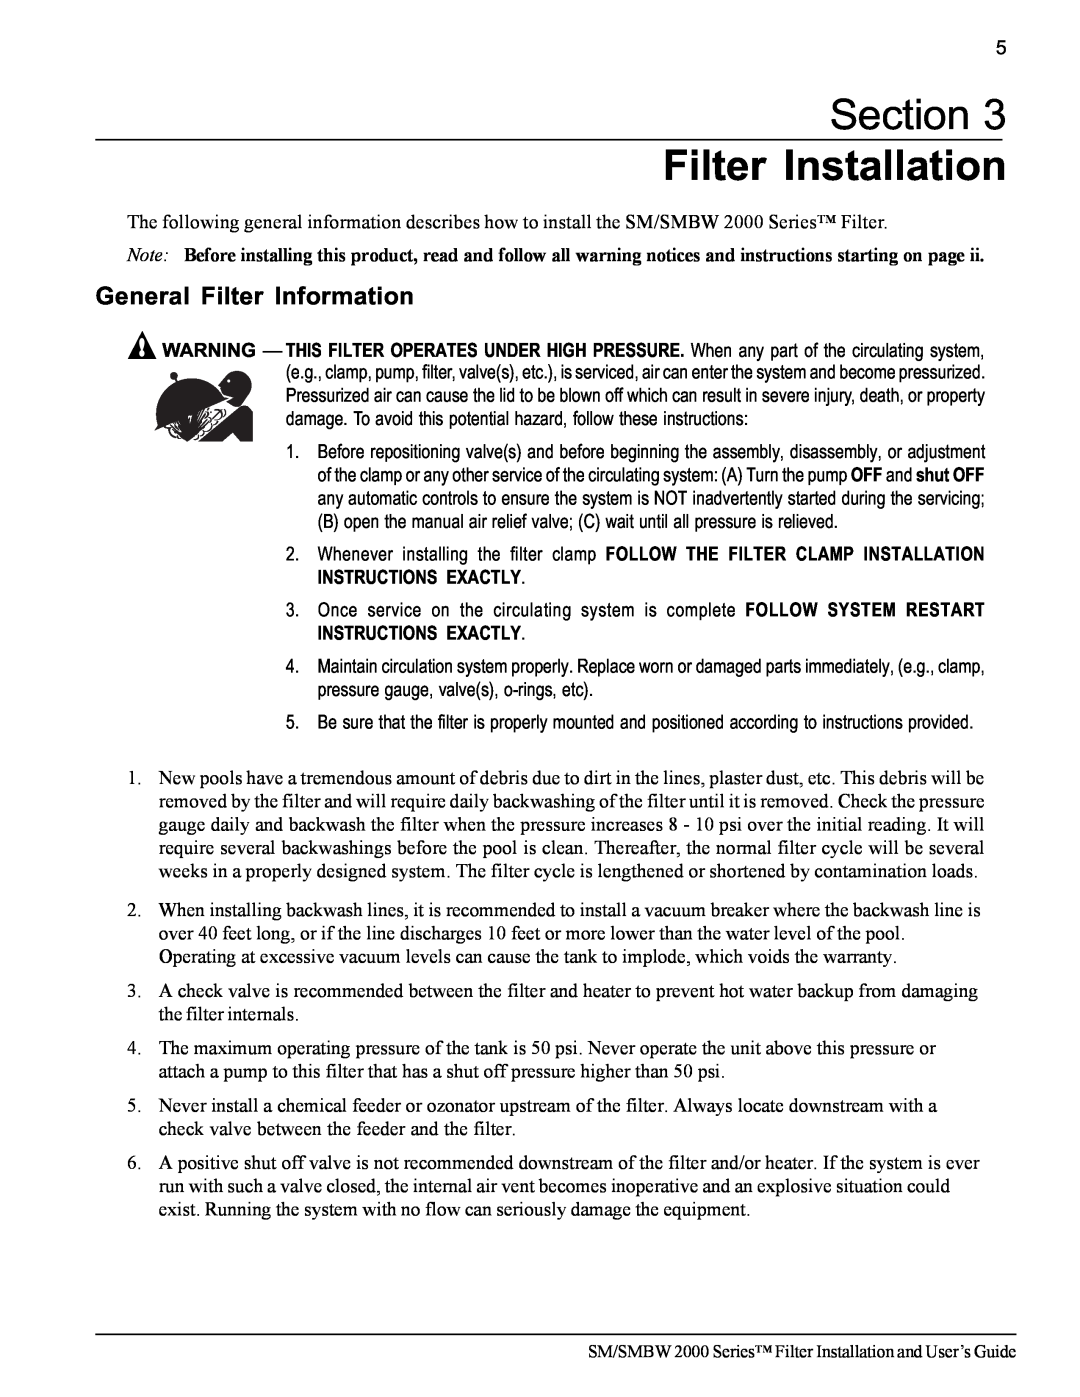 Pentair SM/SMBW 2000 important safety instructions Section Filter Installation, General Filter Information 